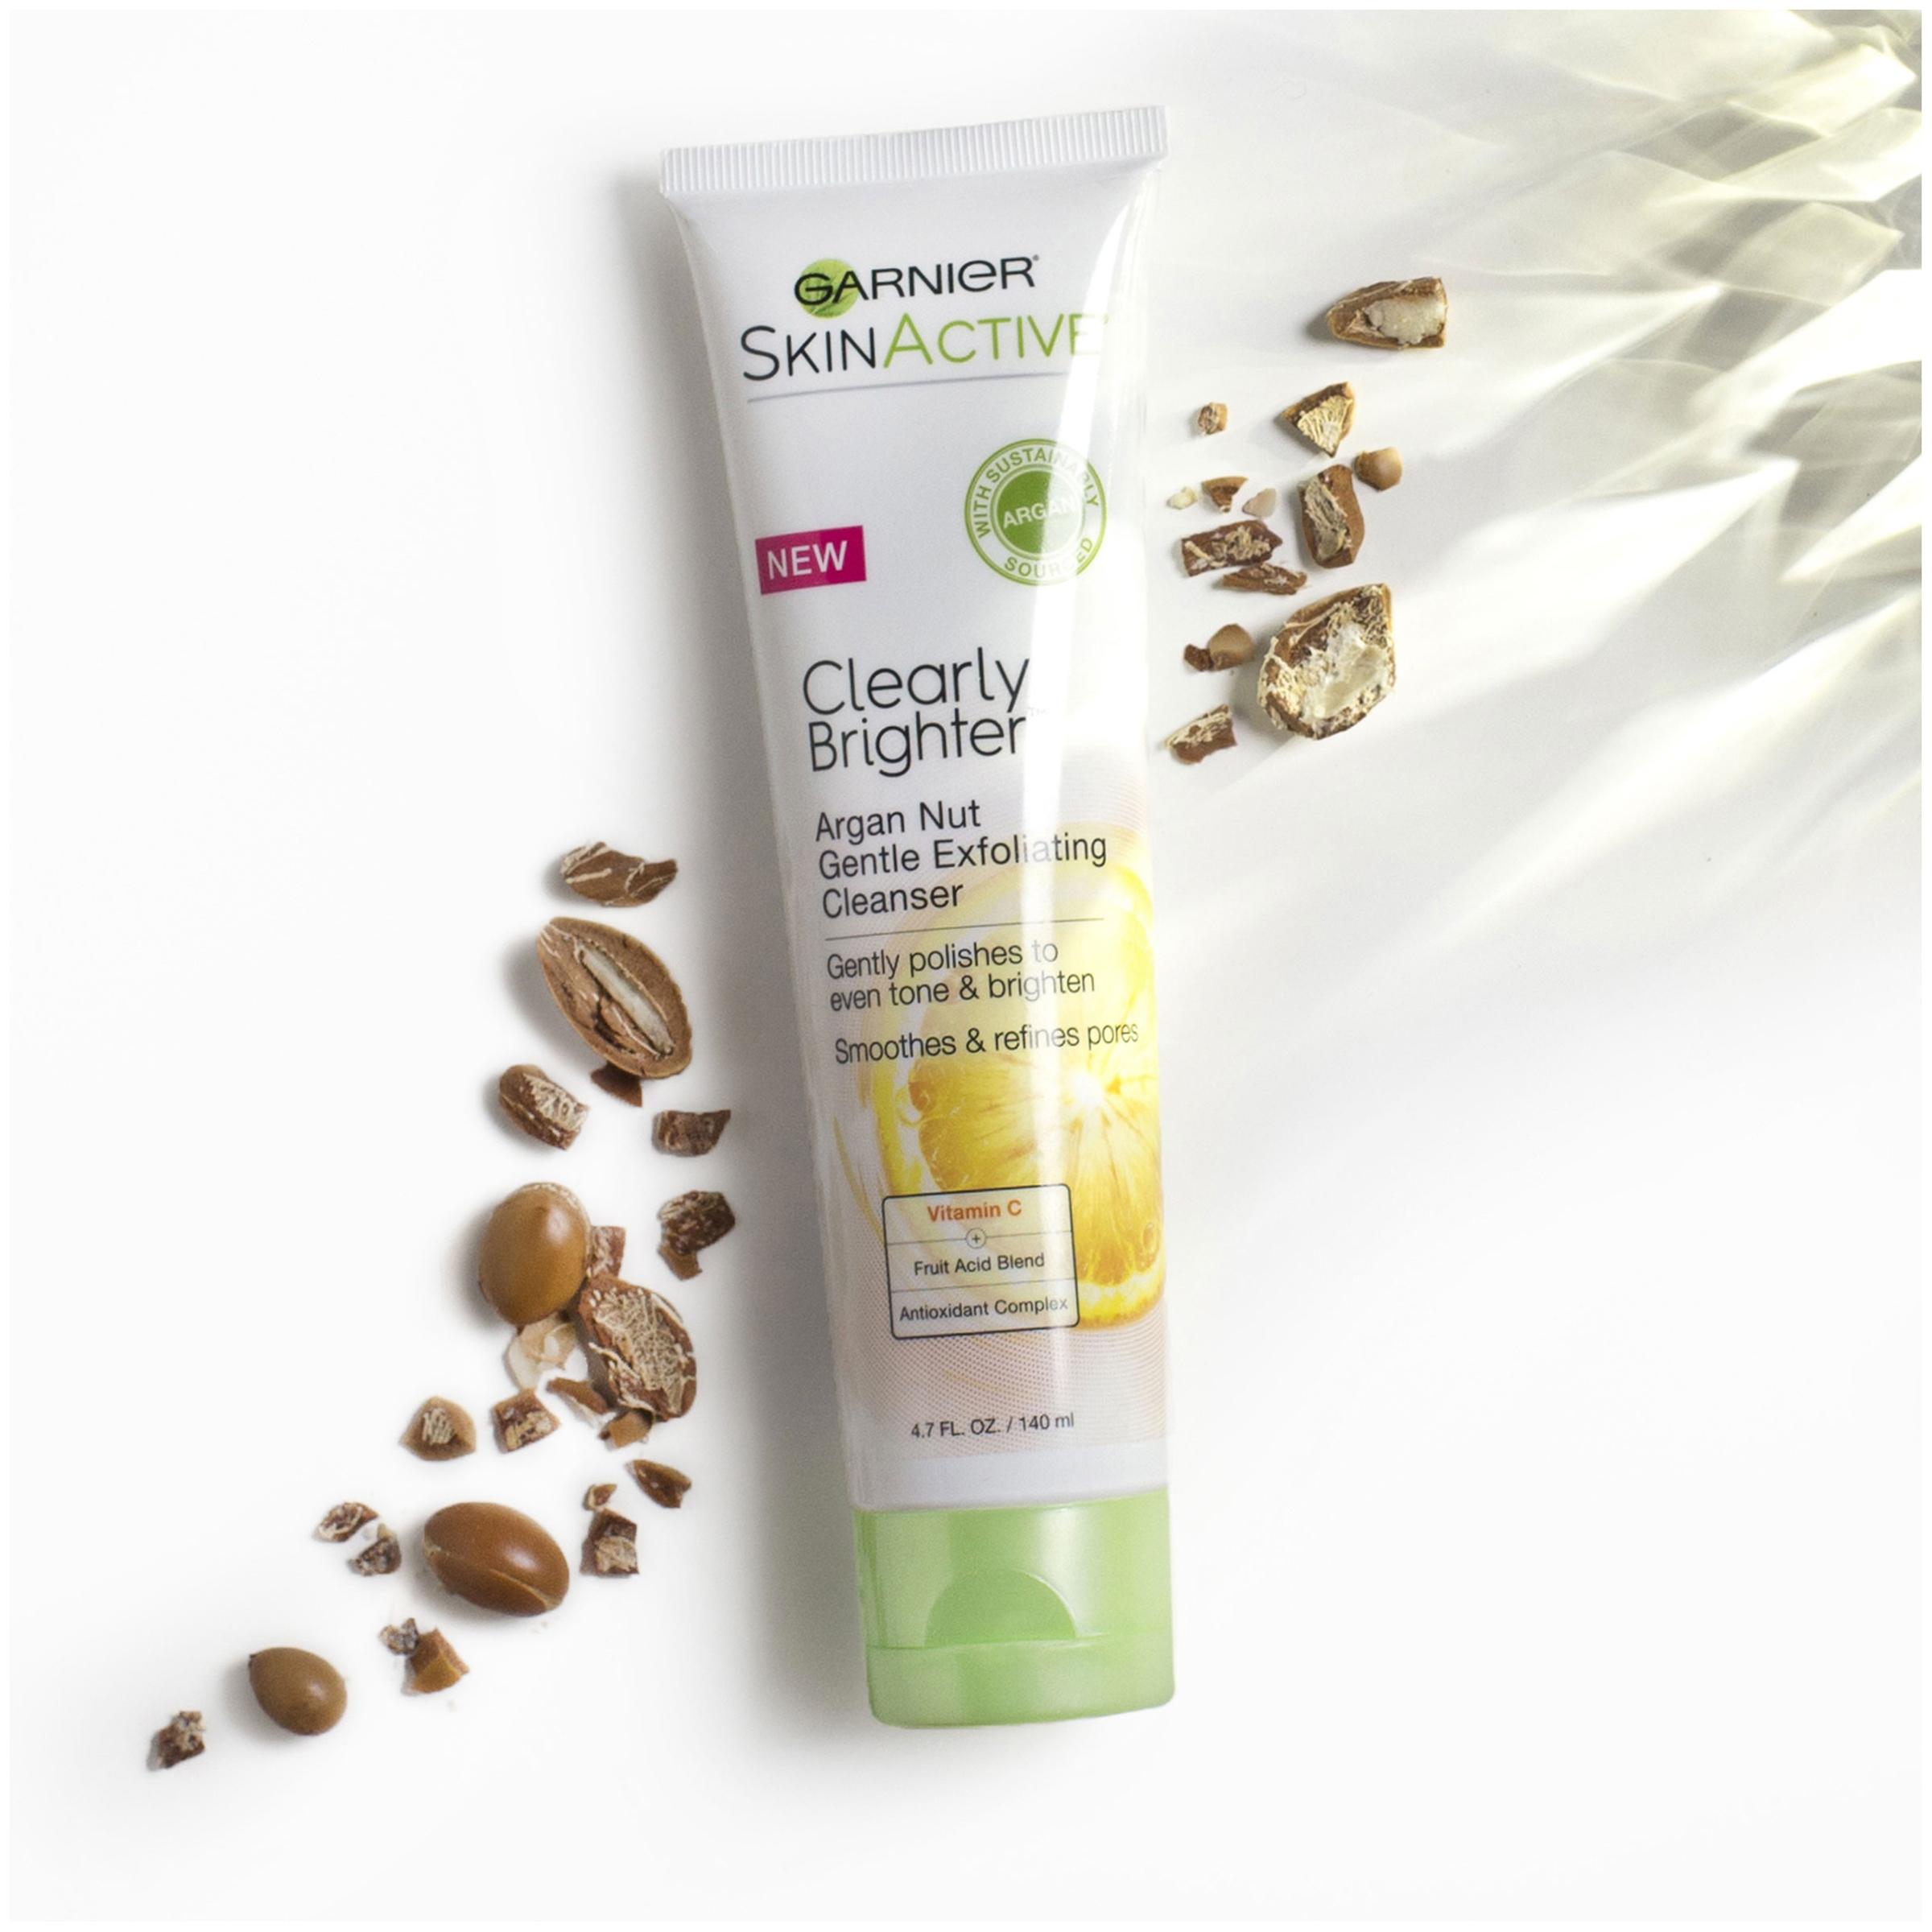 SkinActive Clean+ Clearly Brighter Exfoliating Cleanser